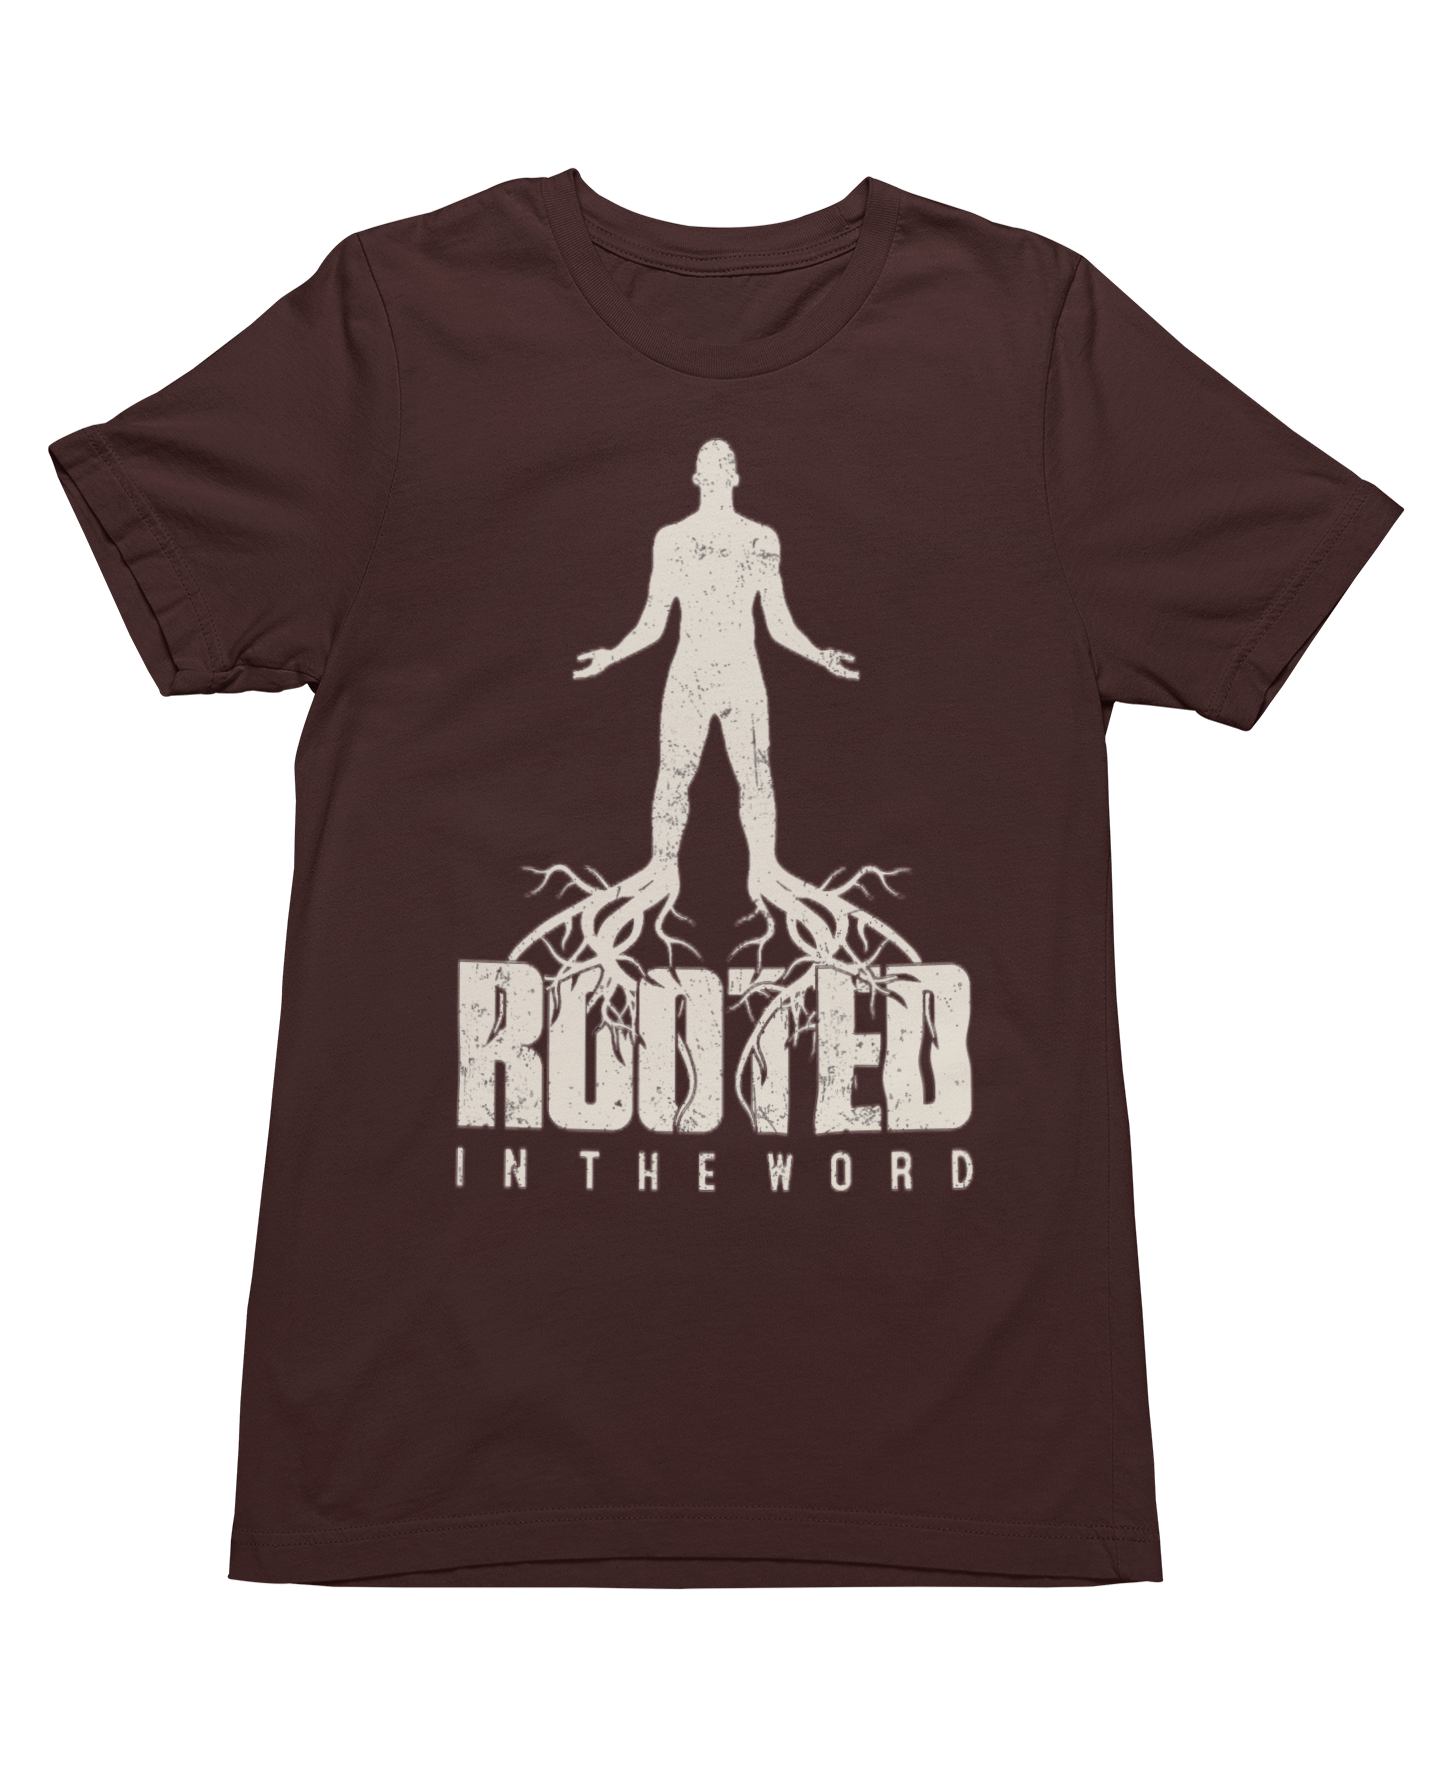 Wrighteous Wear T-Shirt S / Dark chocolate Rooted in the Word Unisex Christian Tee